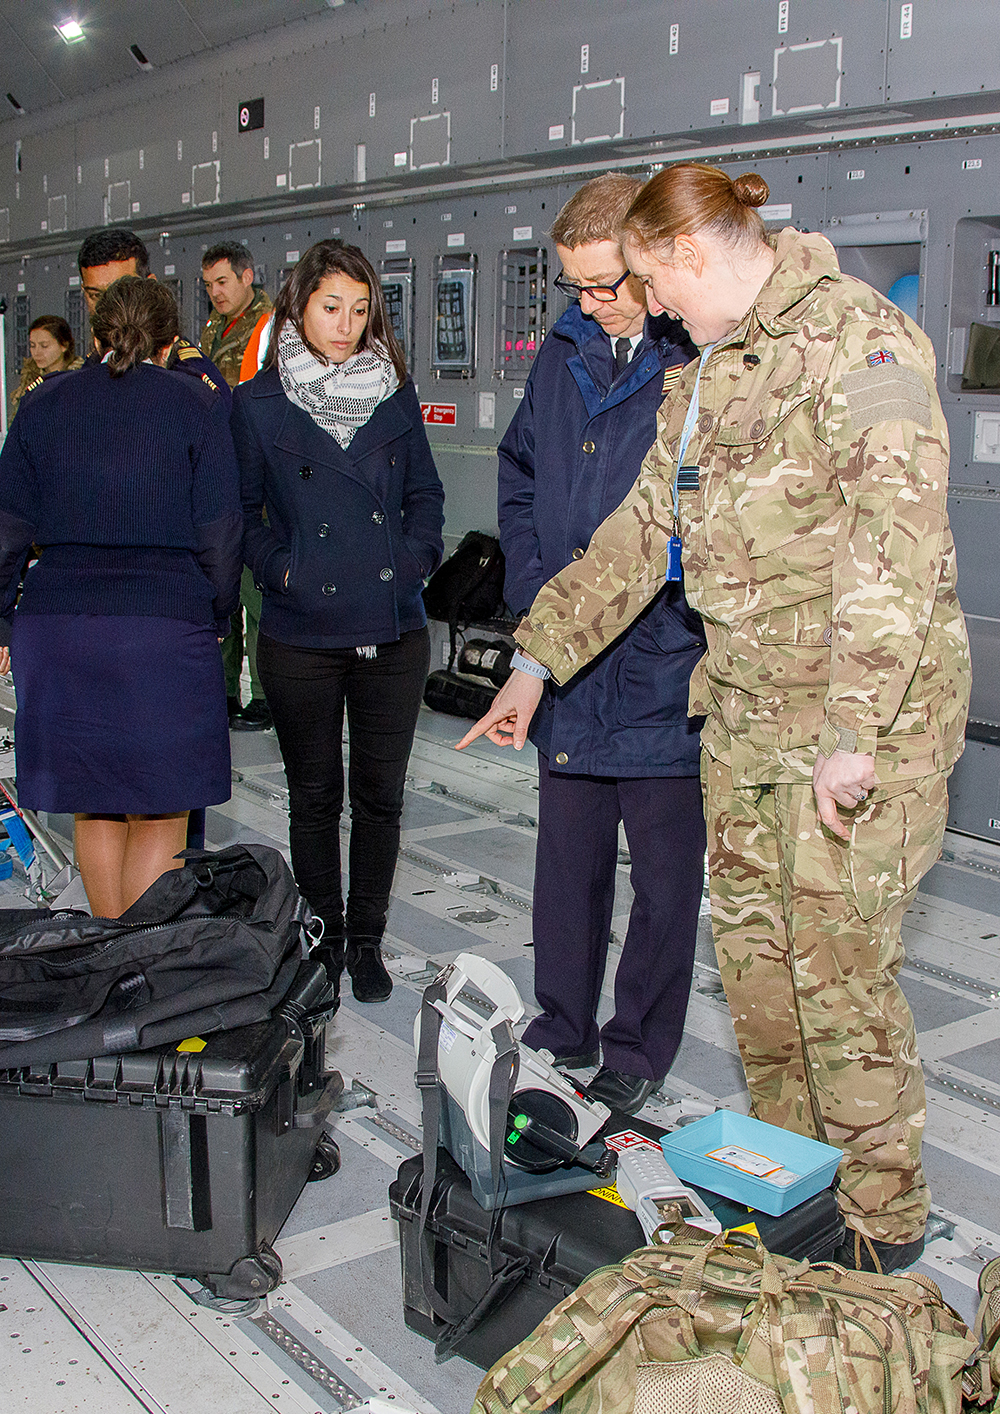 Members of TMW talk through the medical kit and equipment that is required for AE